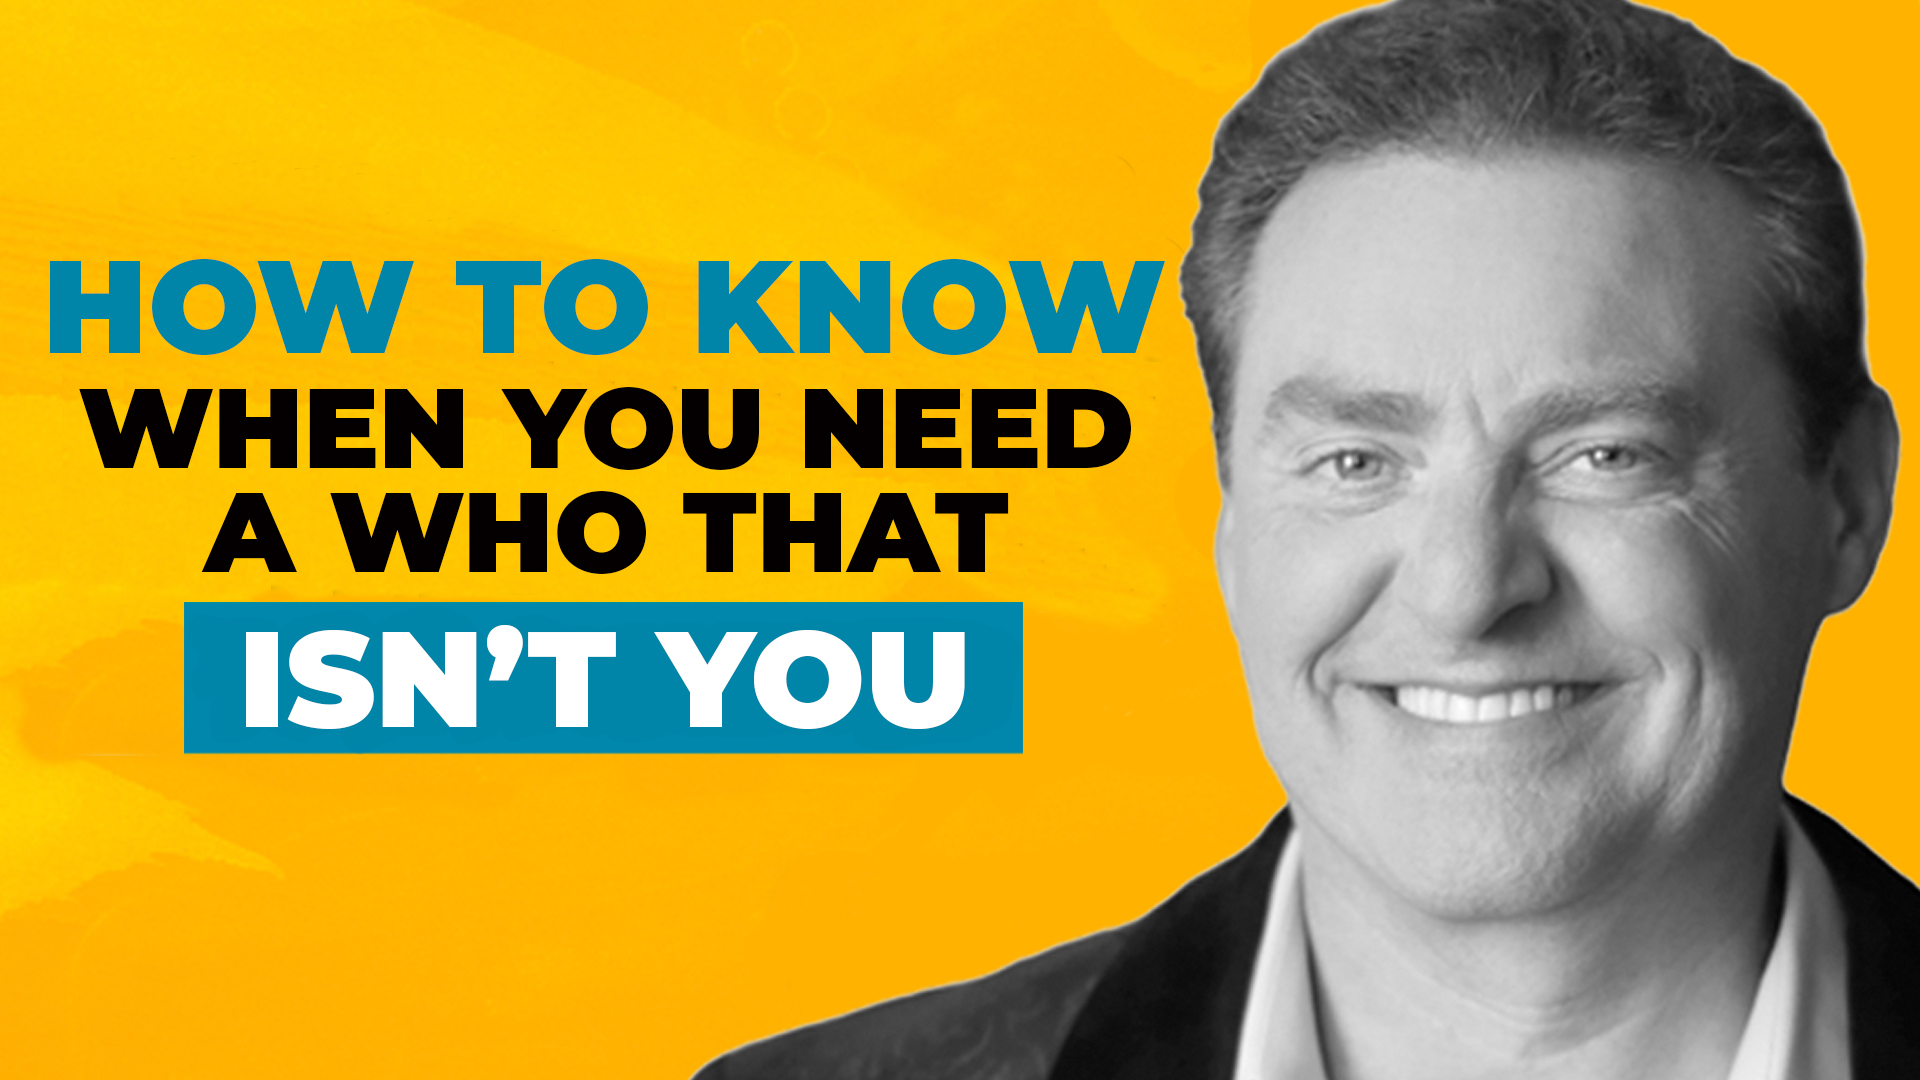 Headshot image of Mike Koenigs on a yellow background with a text overlay reading "How to Know When You Need a Who That Isn't You"